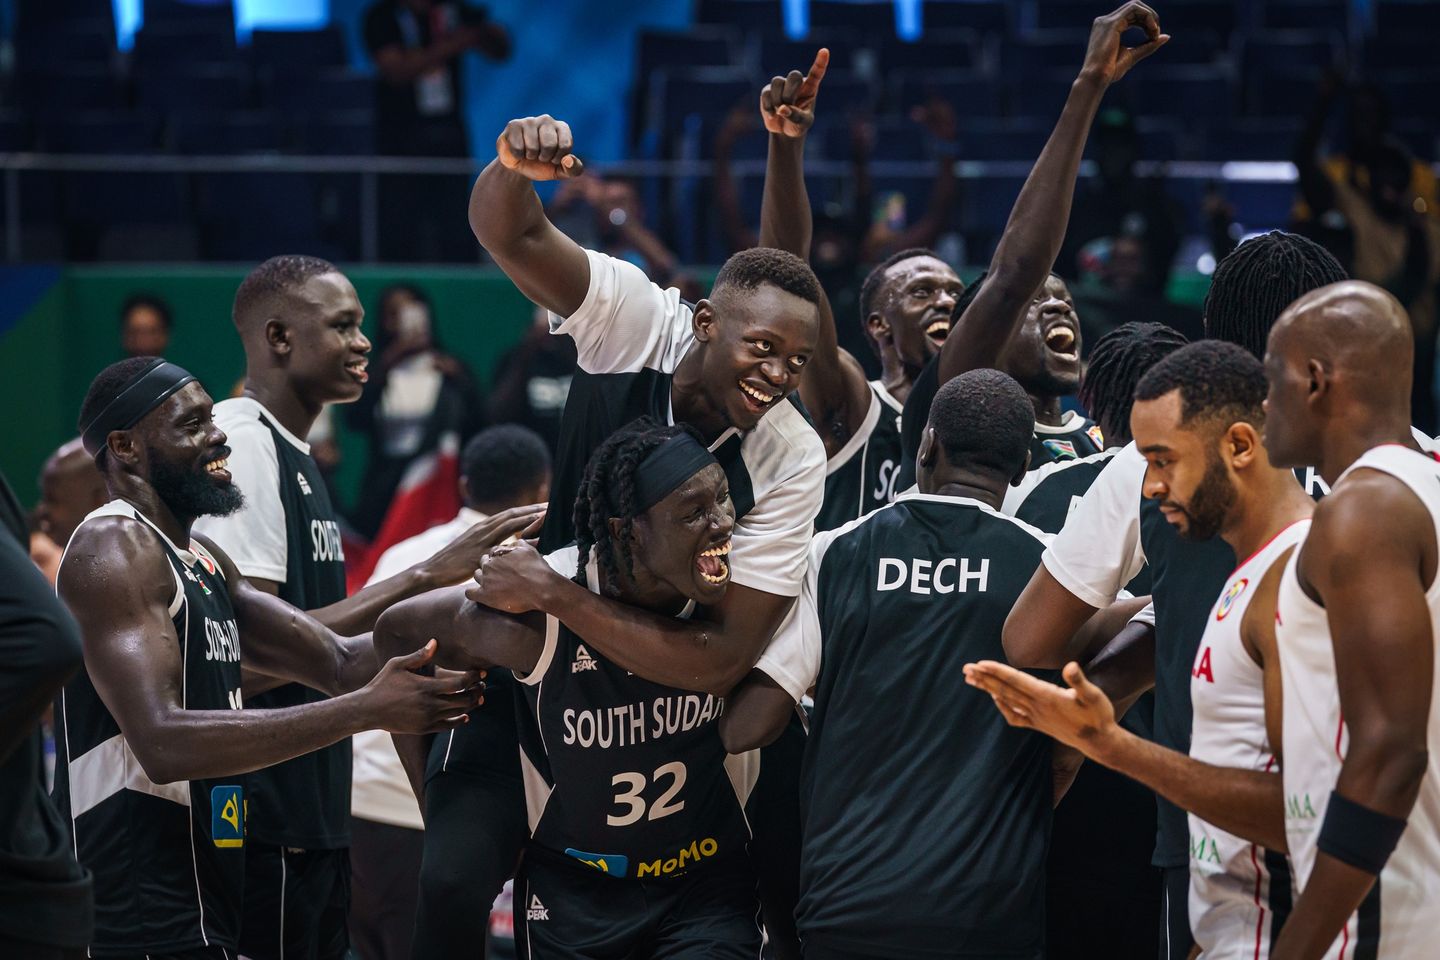 South Sudan beat Angola, to represent Africa at Paris Olypmics